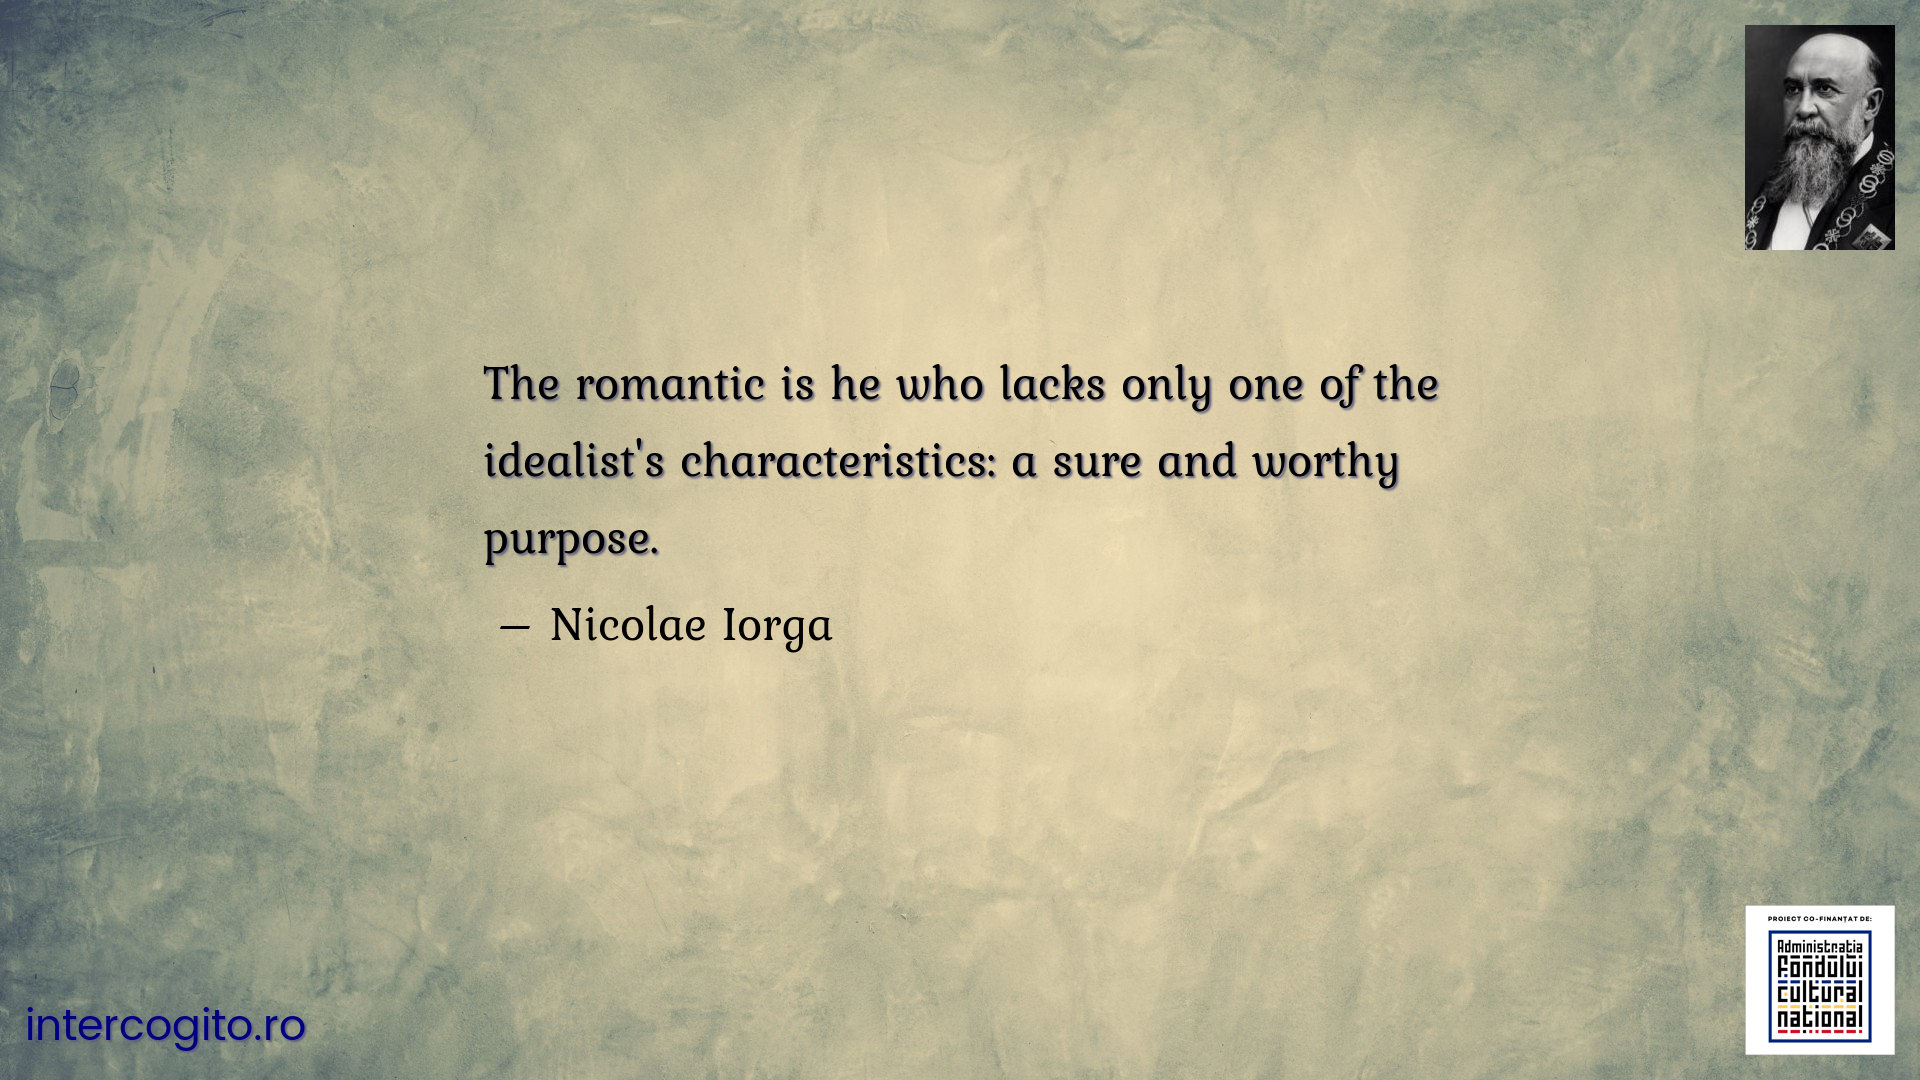 The romantic is he who lacks only one of the idealist's characteristics: a sure and worthy purpose.